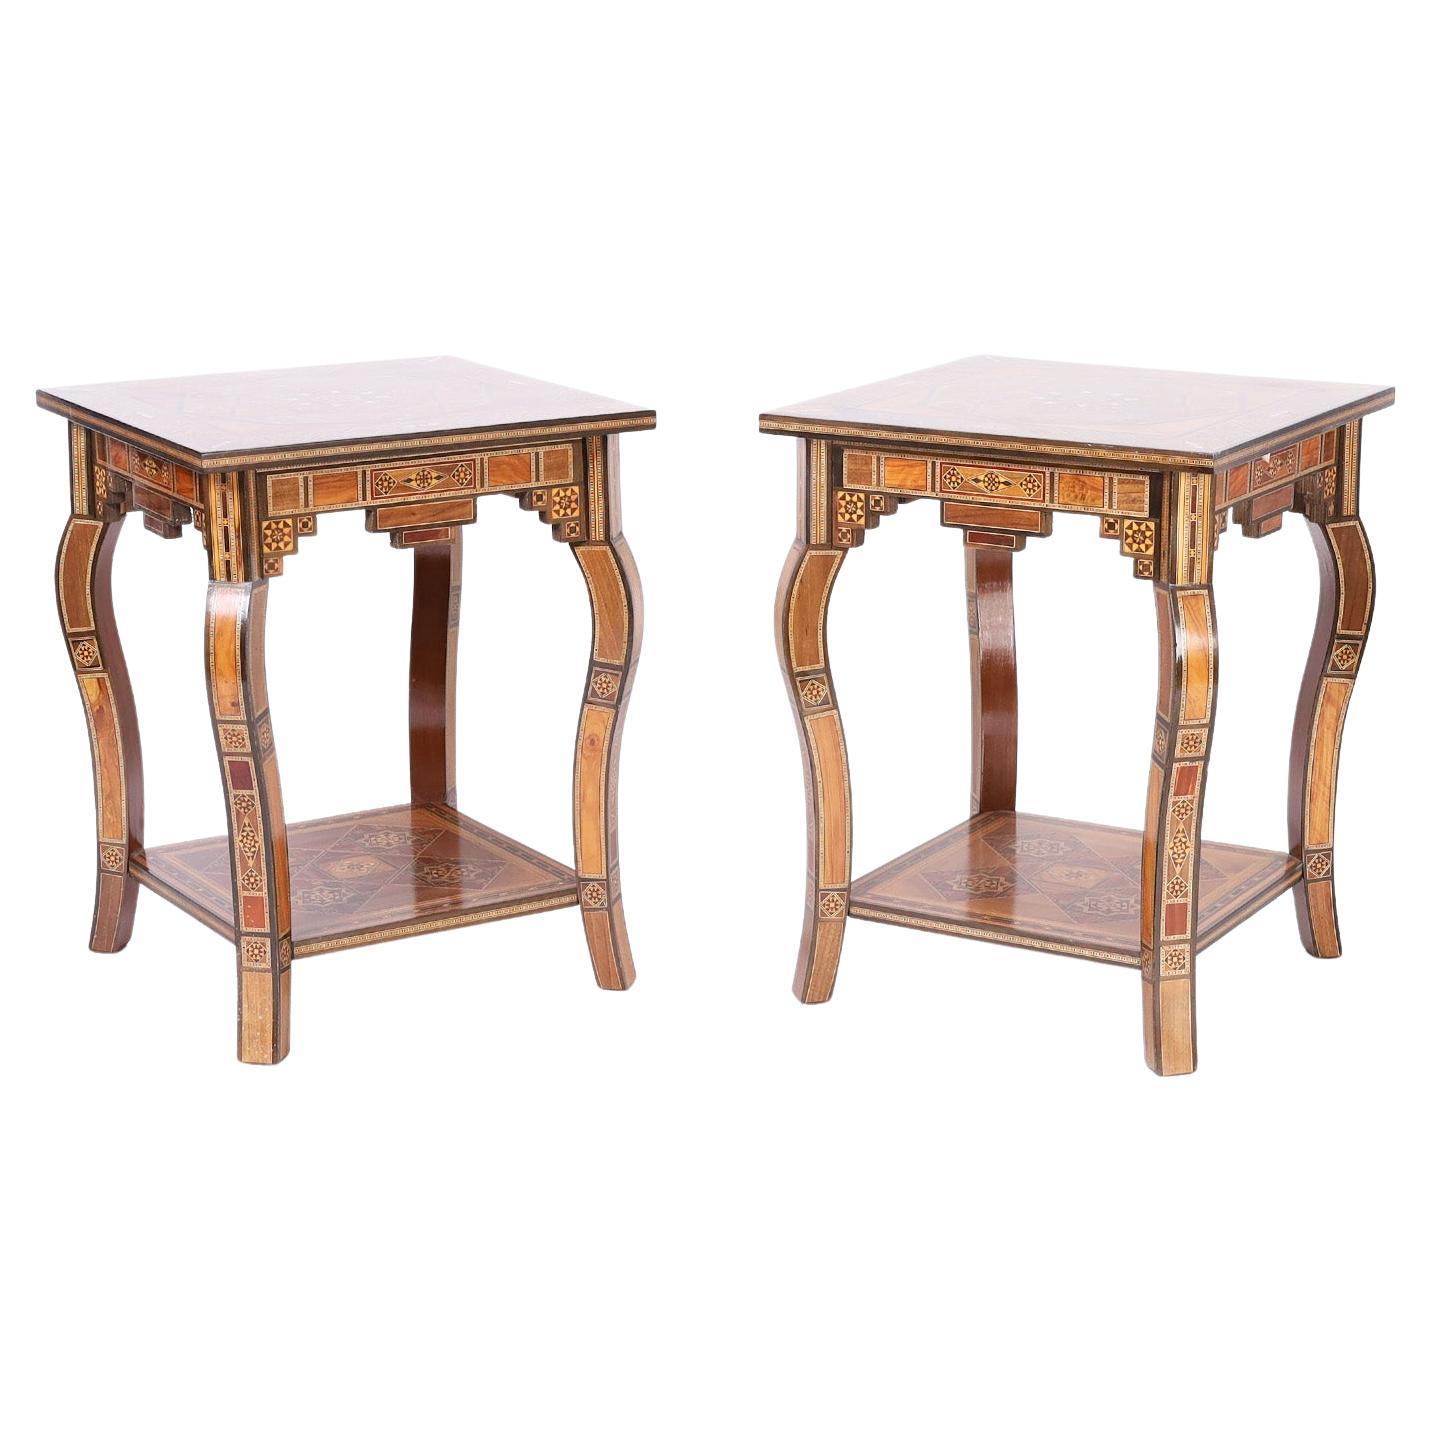 Pair of Vintage Moroccan Inlaid Stands or Tables